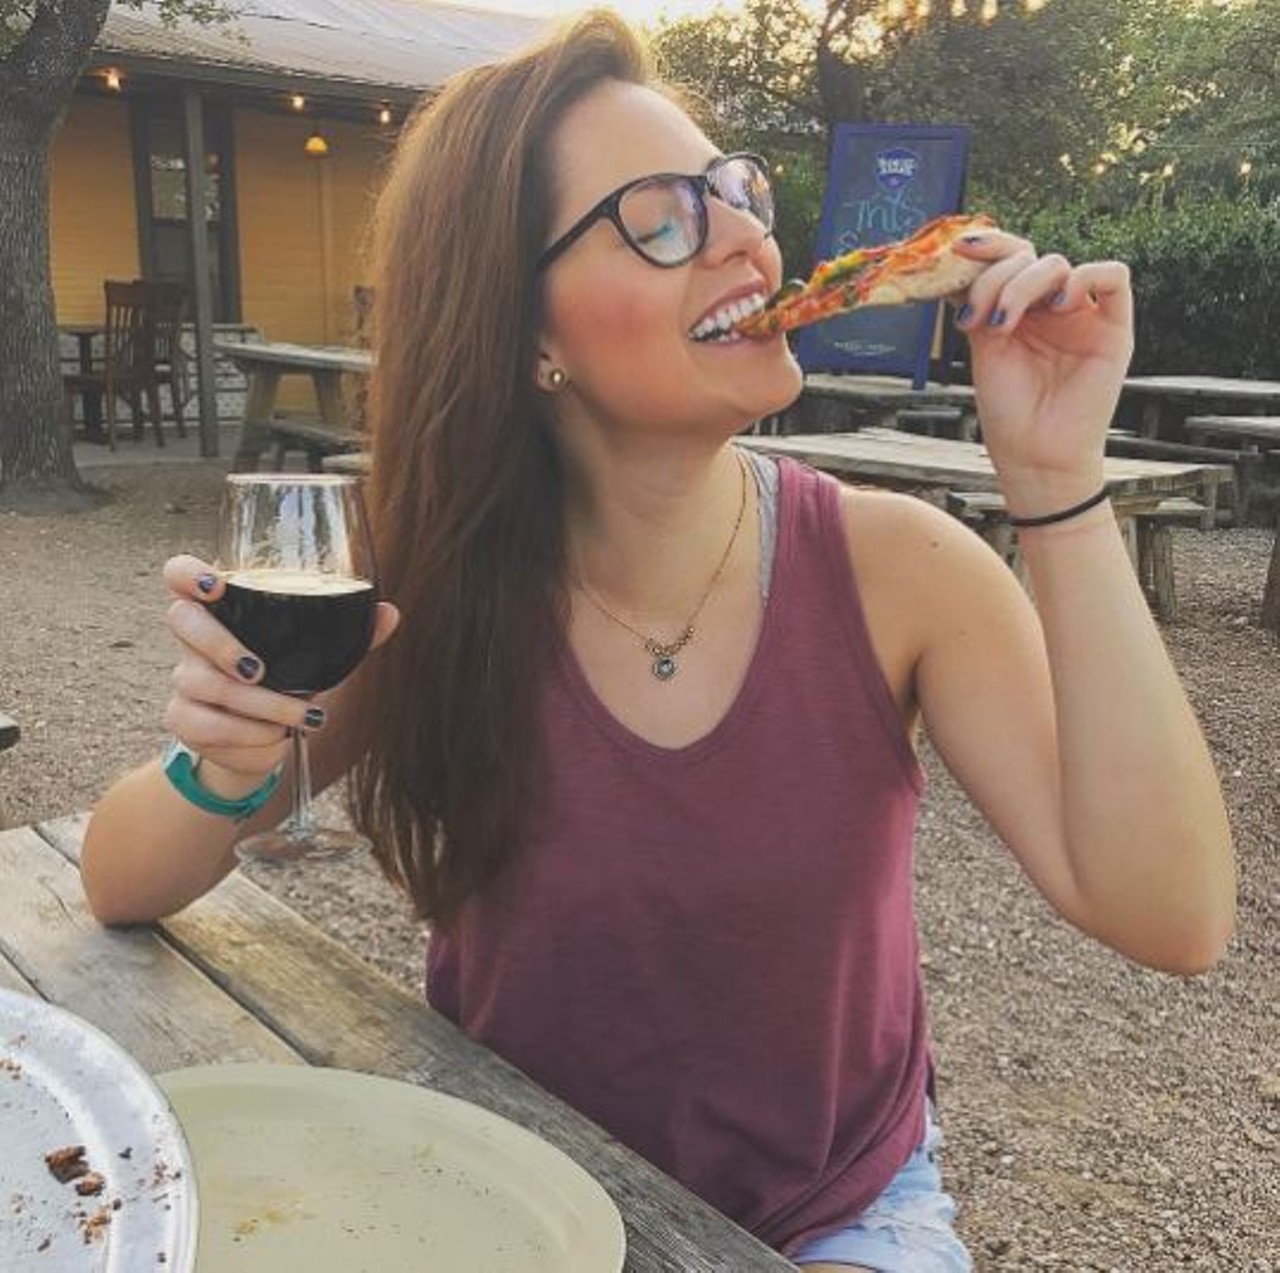 Fralo&#146;s Pizza
23651 I-10 Frontage Road, (210) 698-6616
This fun outdoor eatery is a great spot for people wanting to bring their own drinks to dinner.
Photo via Instagram, lyndserella_